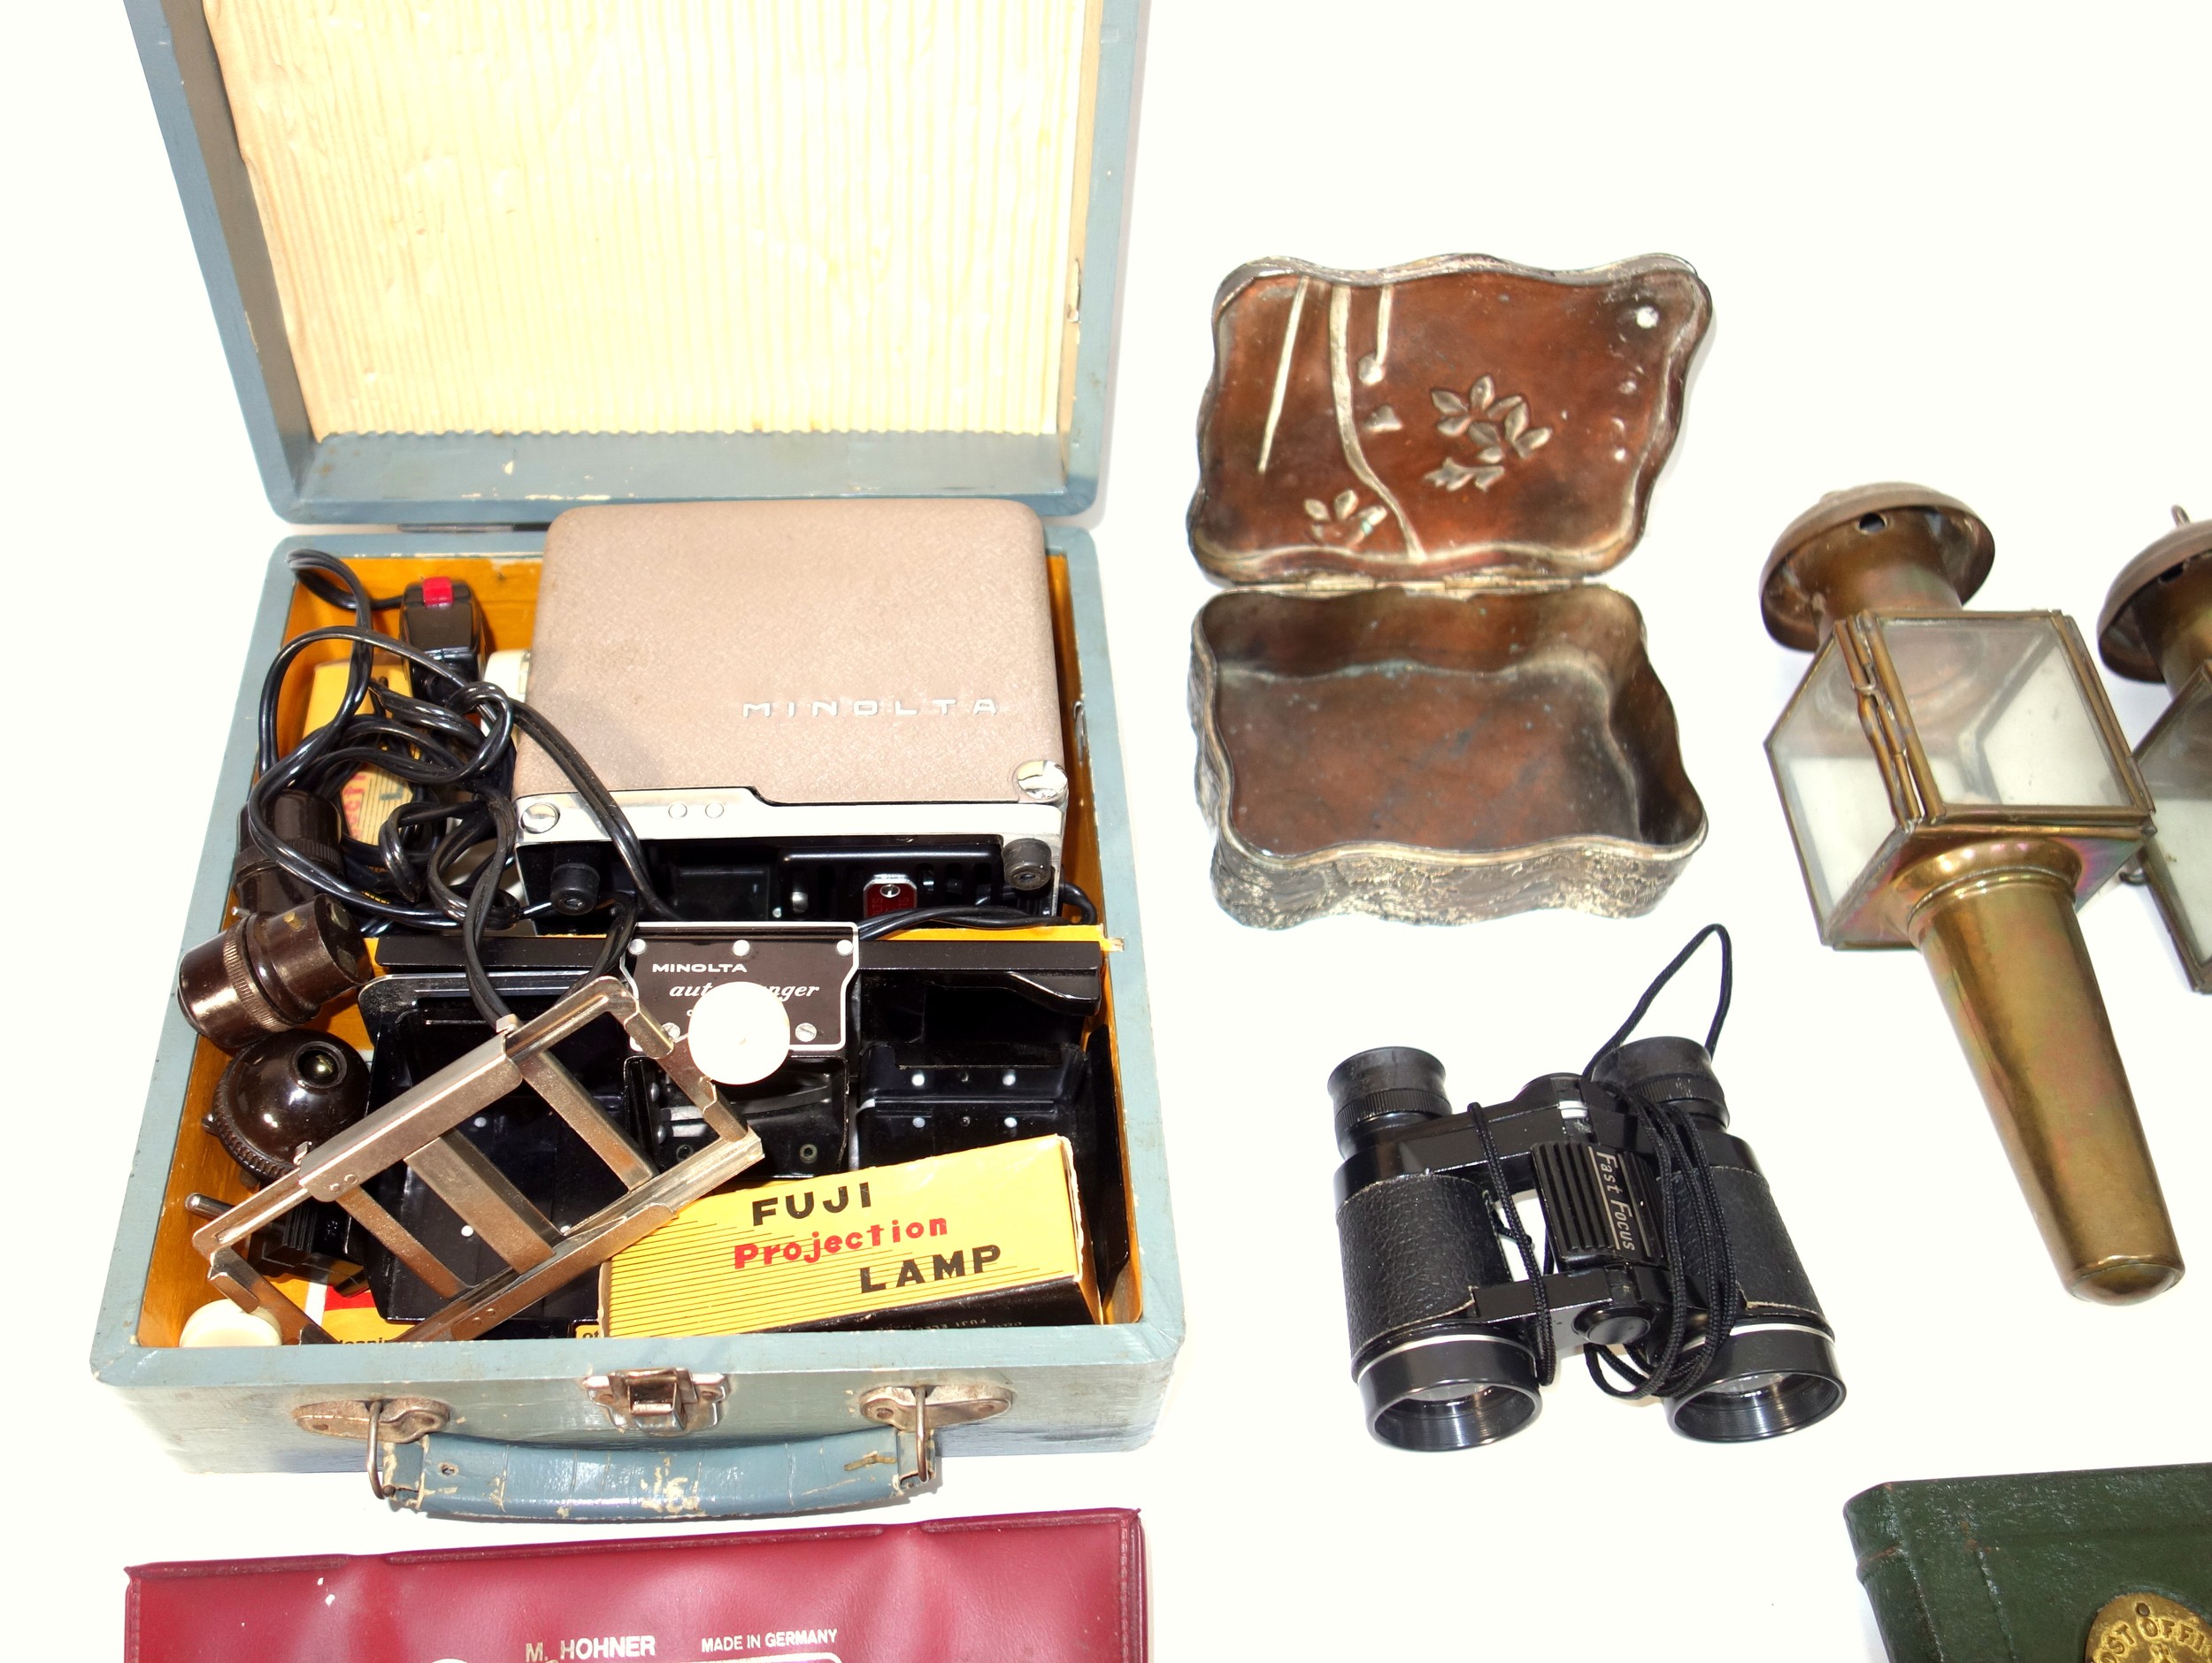 Stereoscope viewer with 3 slides, miniature Singer Sewing machine, Minolta Mini Slide Projector Kit, - Image 3 of 11